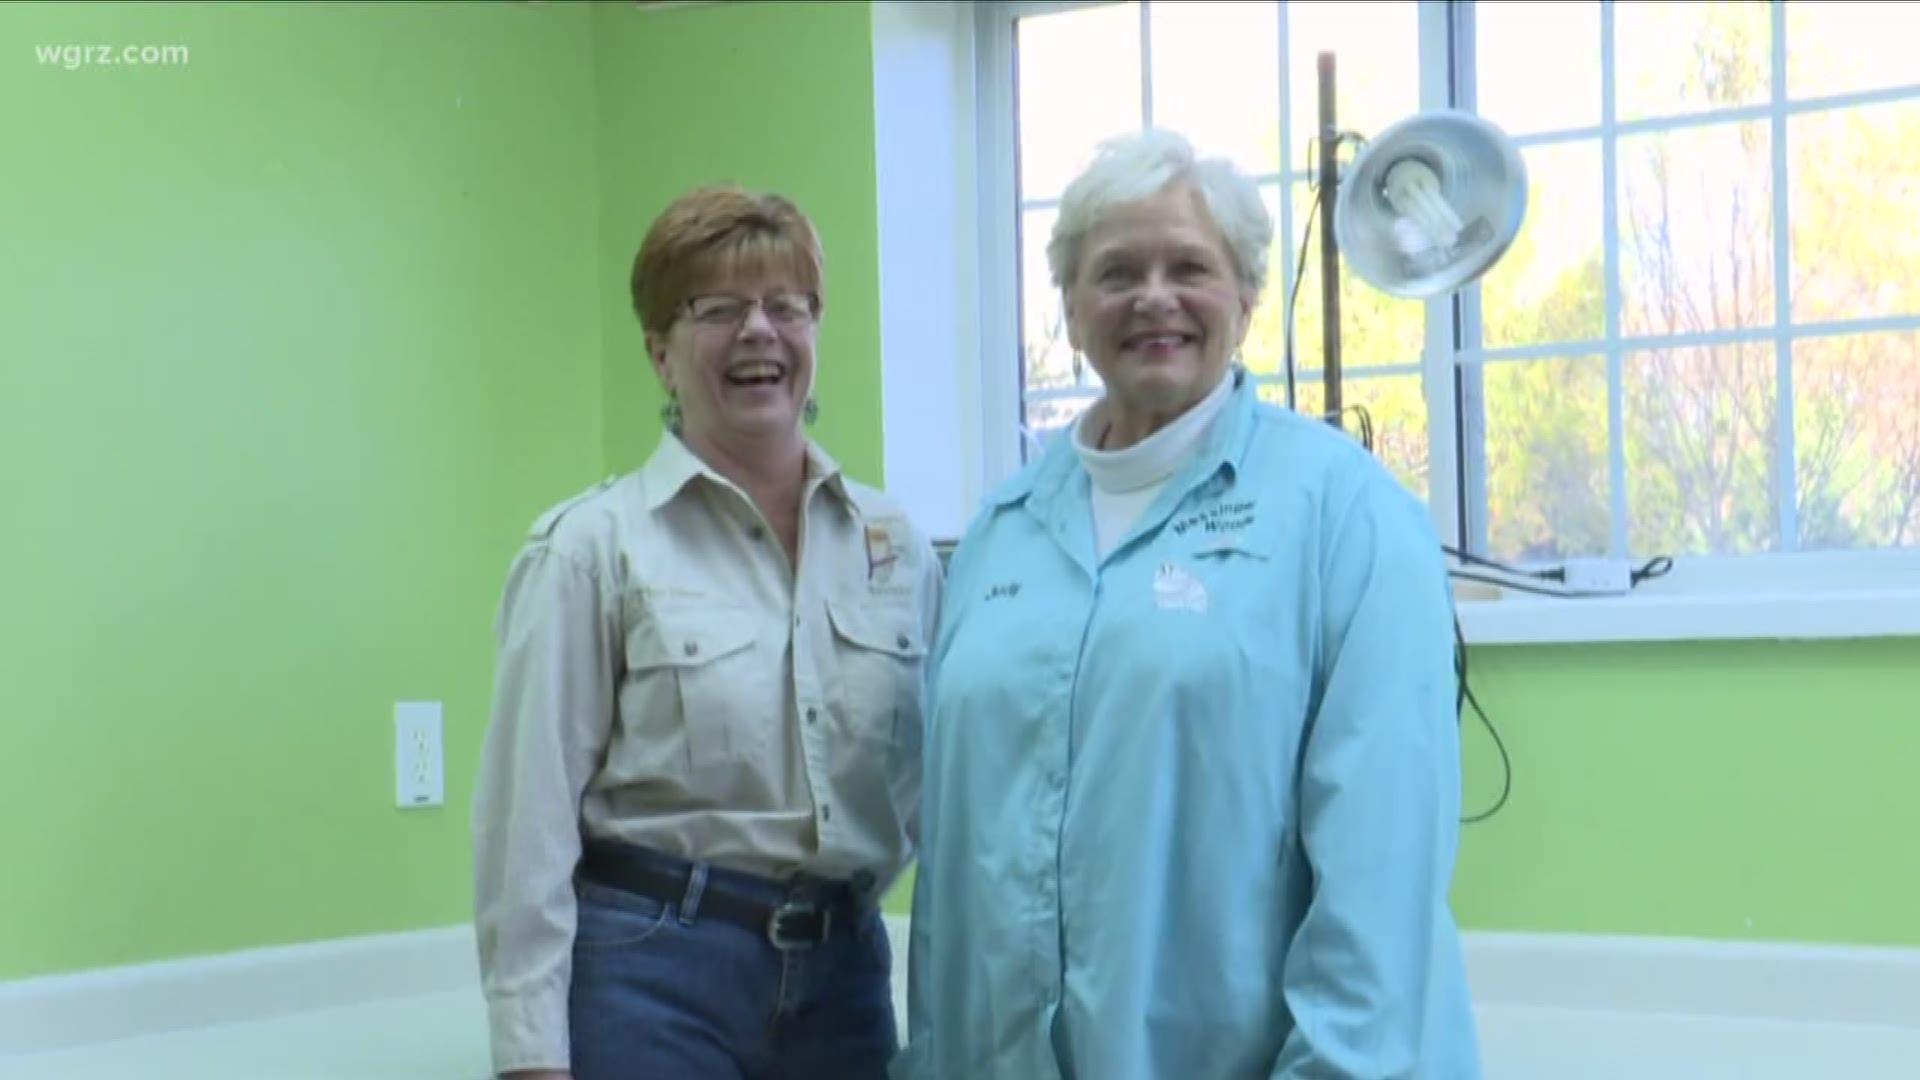 Together, Judy Seiler and Marianne Hites are part of a team of 150 volunteers who care for sick and injured animals at Messinger Woods in Holland.